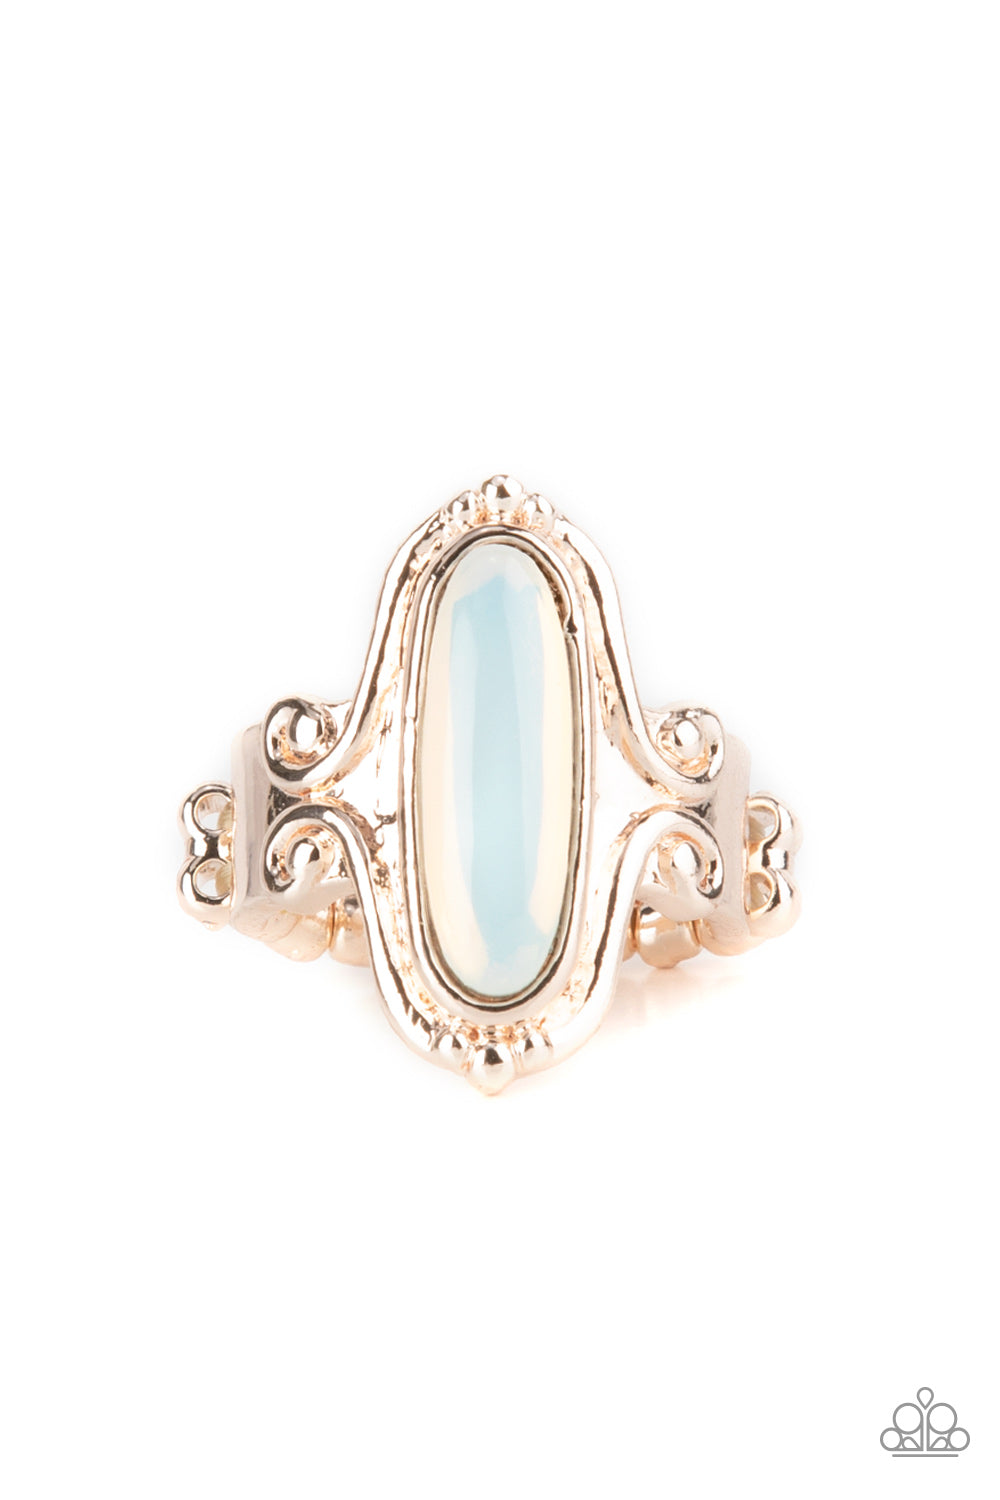 Hexagon white opal ring vintage pear moss agate ring 14k white gold 6 –  WILLWORK JEWELRY